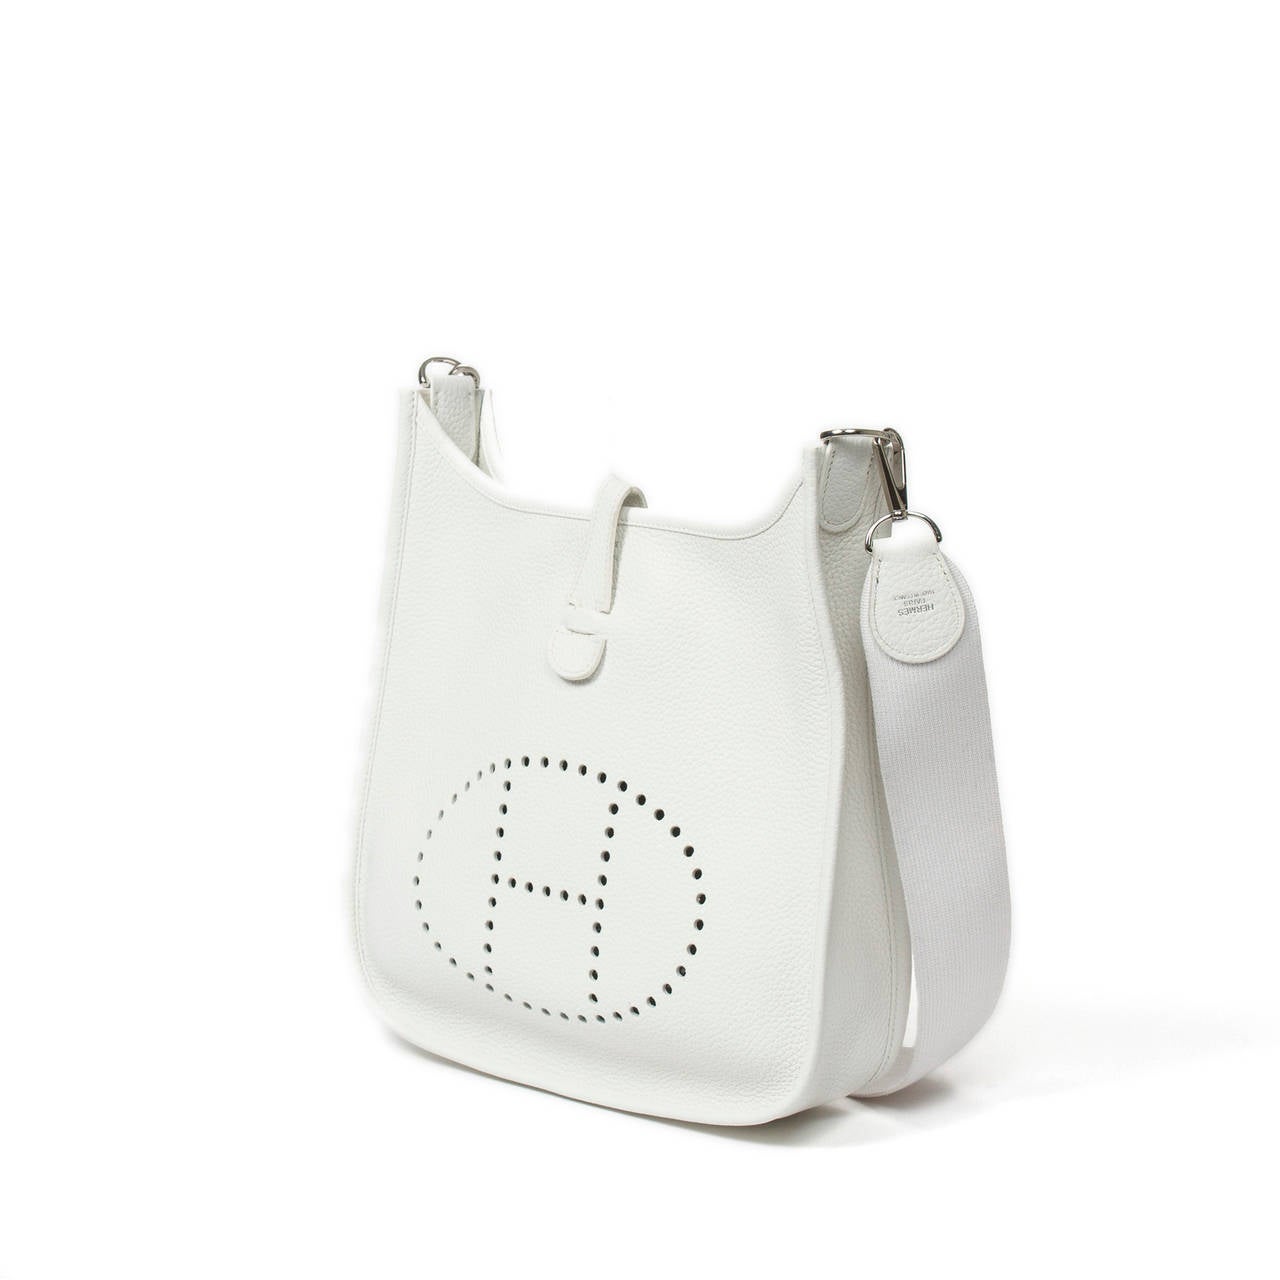 Hermès Evelyne 2 PM in white taurillon leather. Strap adjustable in white canvas. Silver tone hardware. Stamp R in square (2014). Box, dustbag included. Pristine condition.